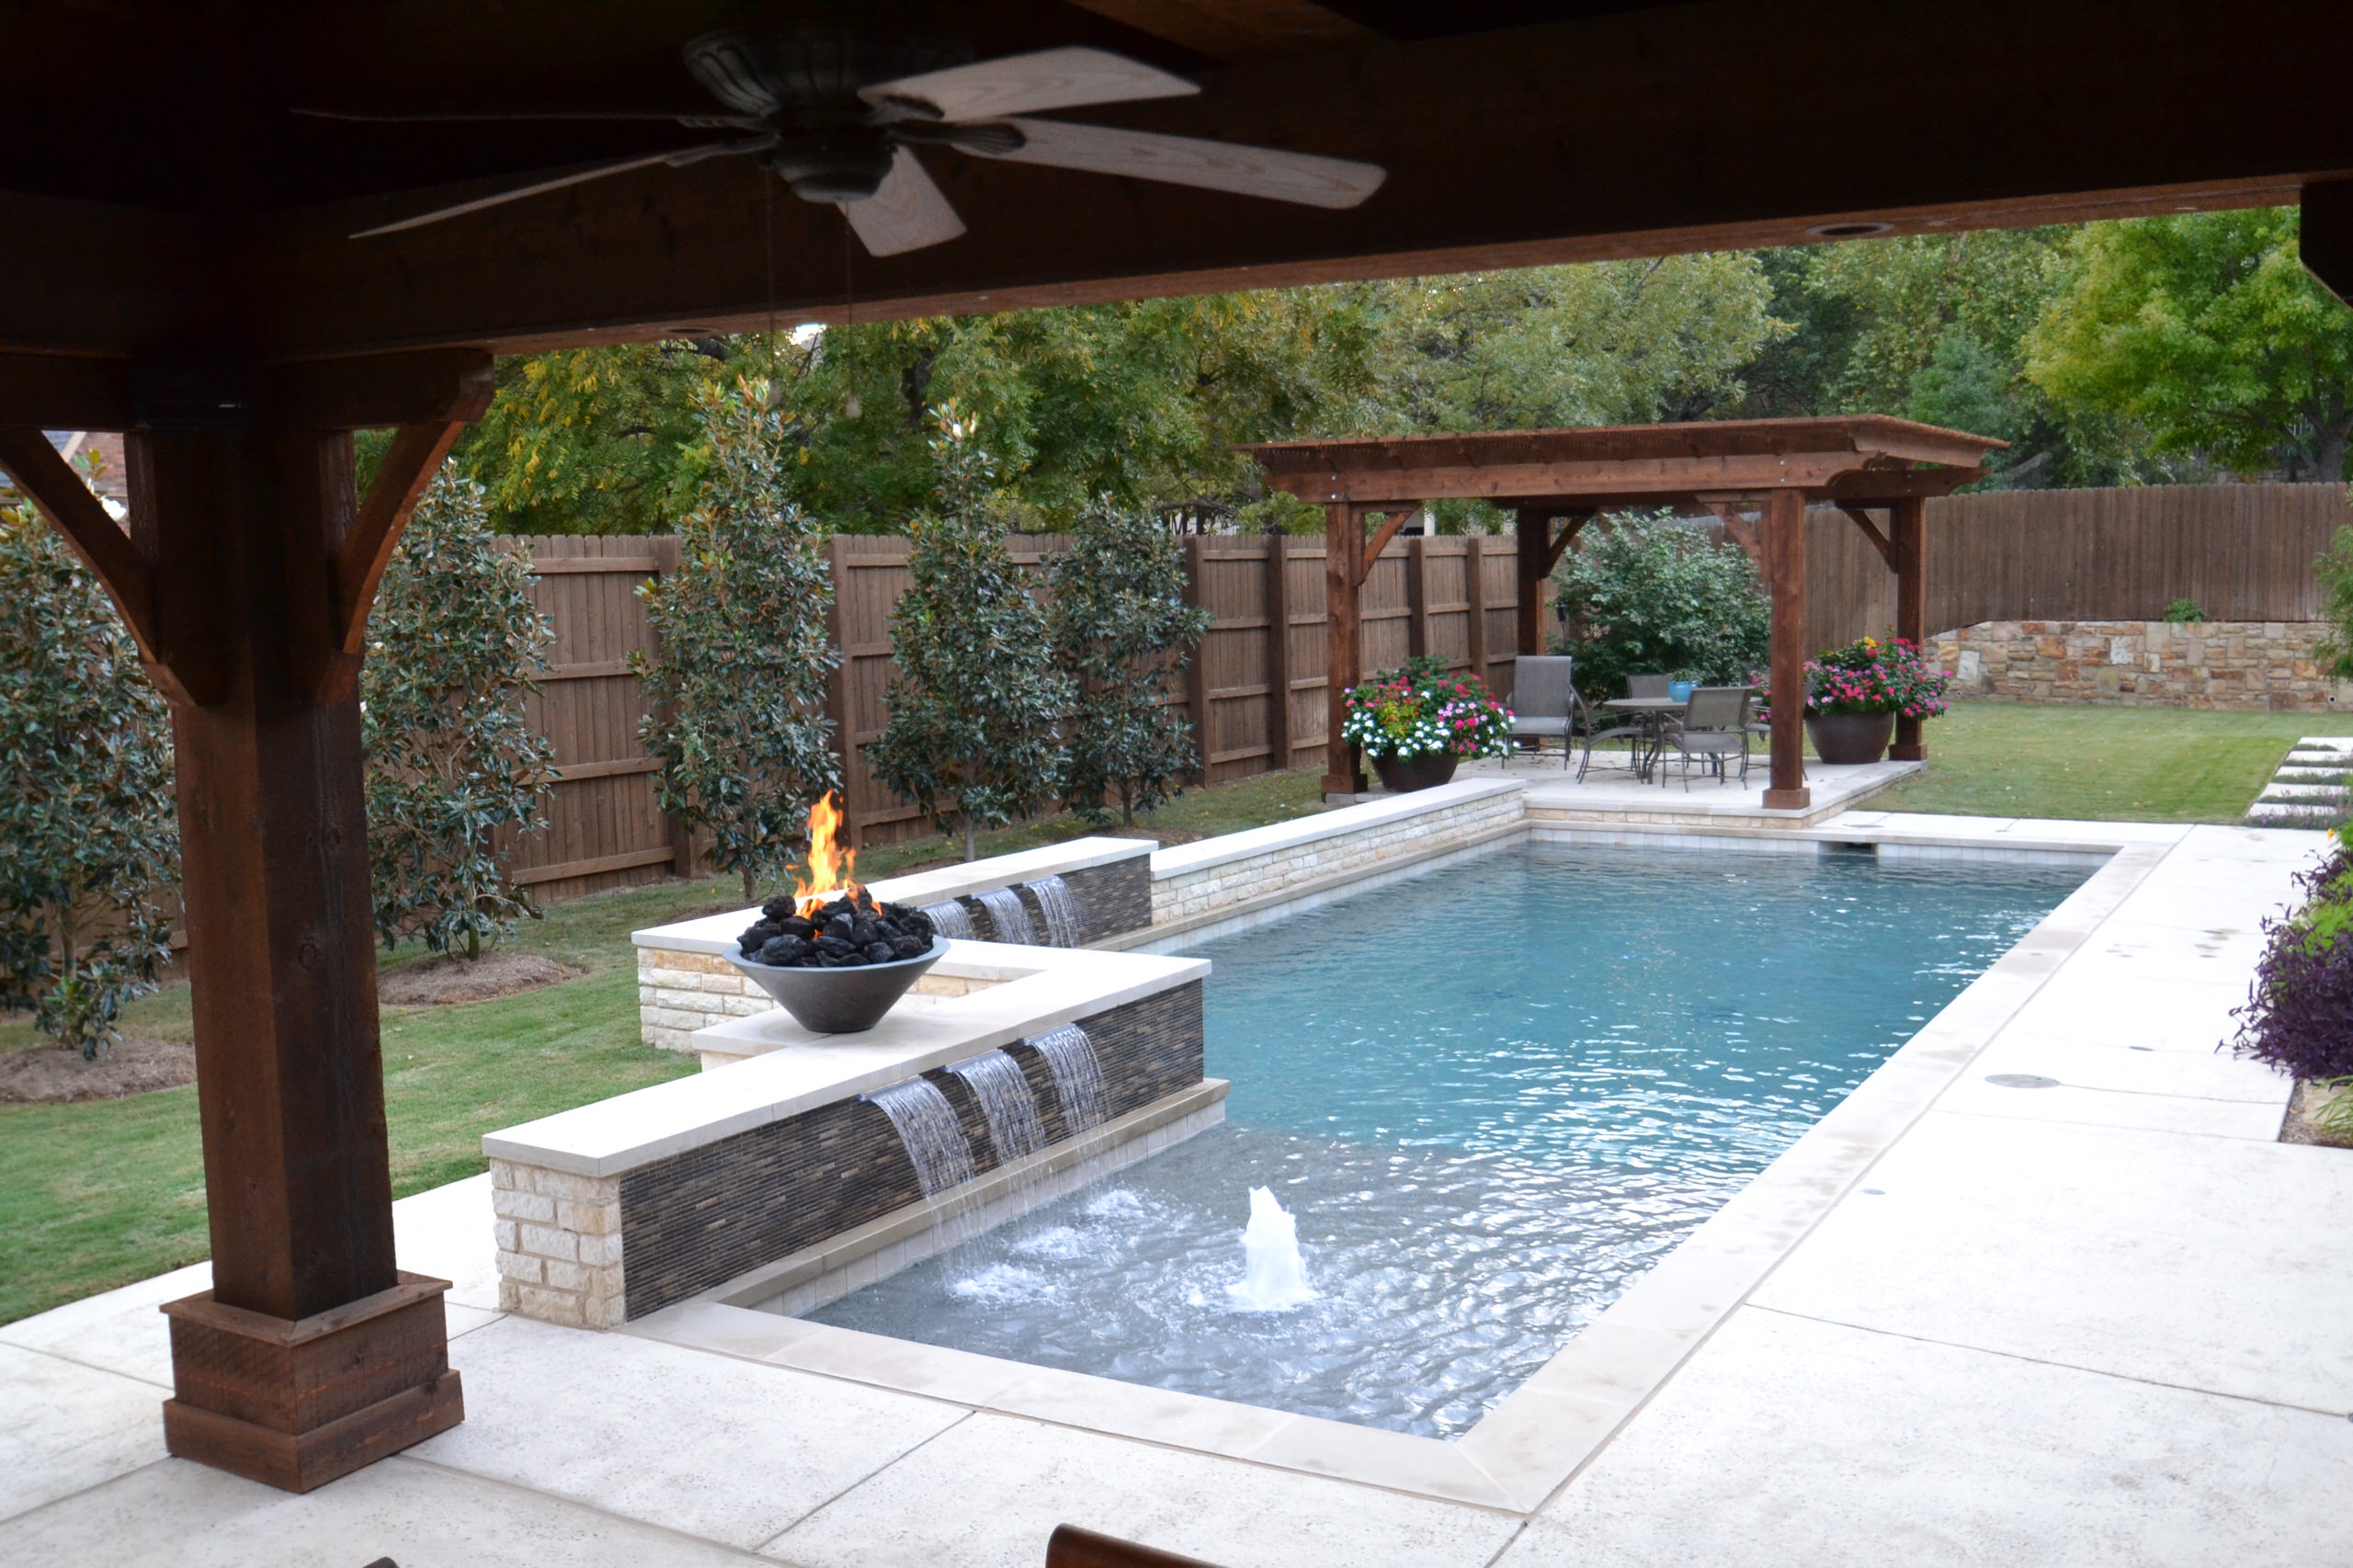 Small Backyard Pool Pictures Ideas, Backyard Designs With Inground Pools